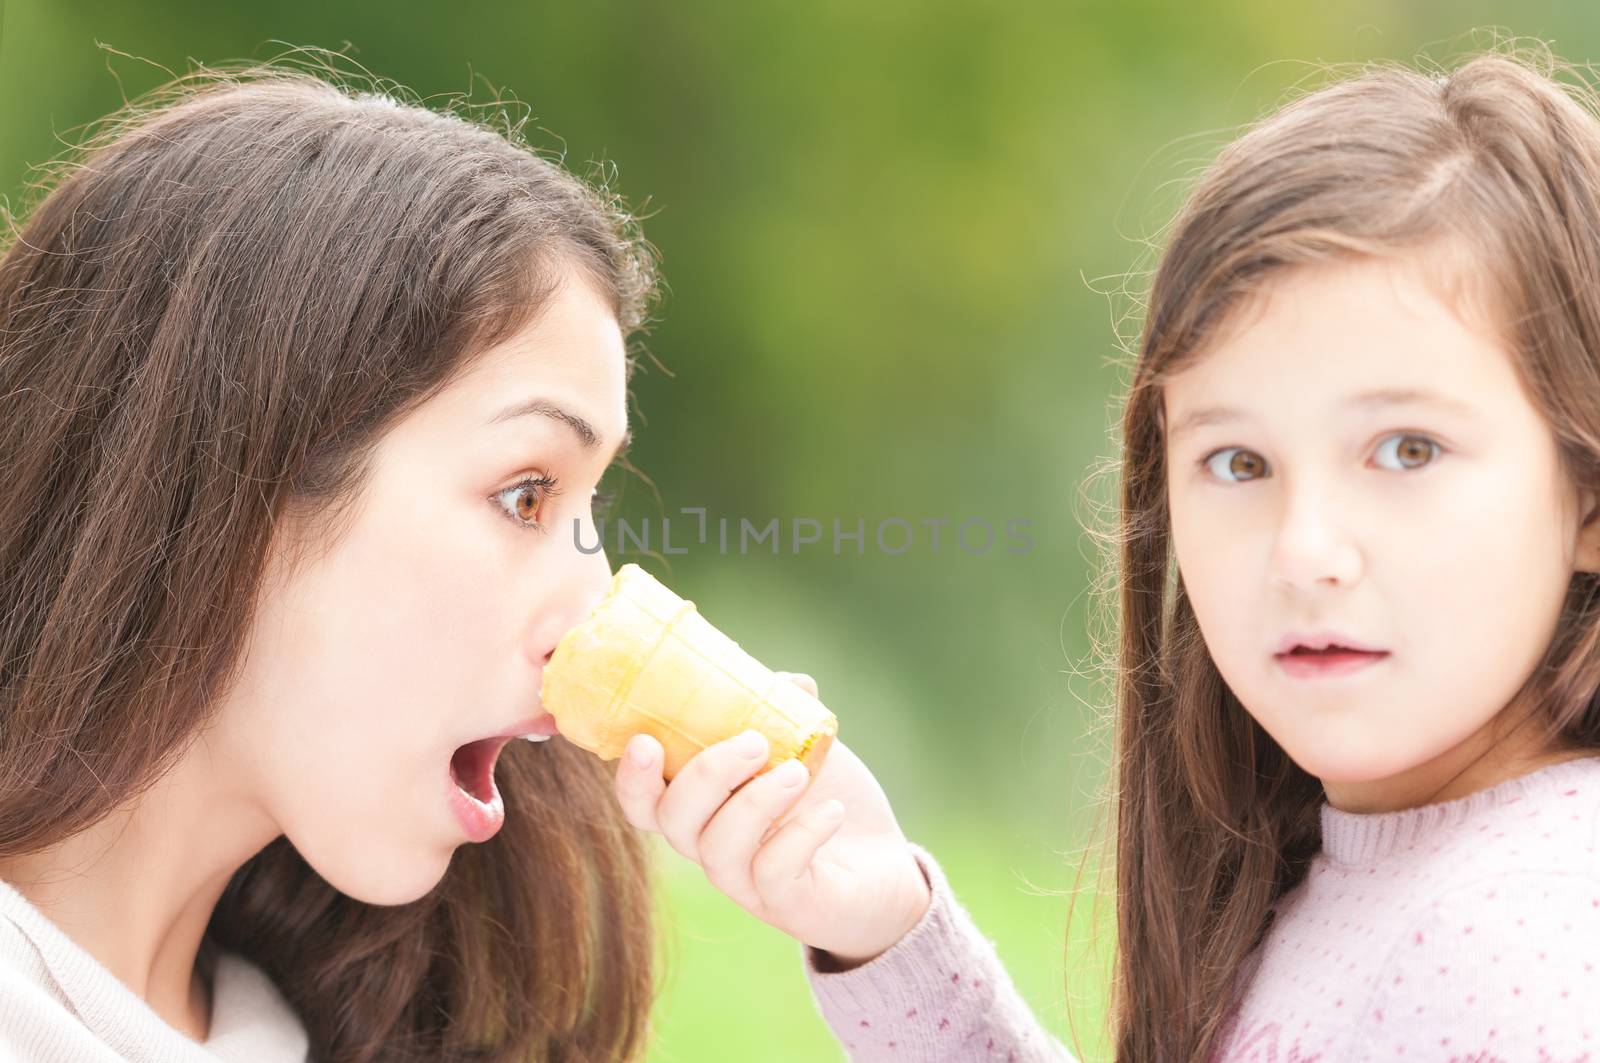 Daughter poked mother with ice cream in her face. by Yolshin